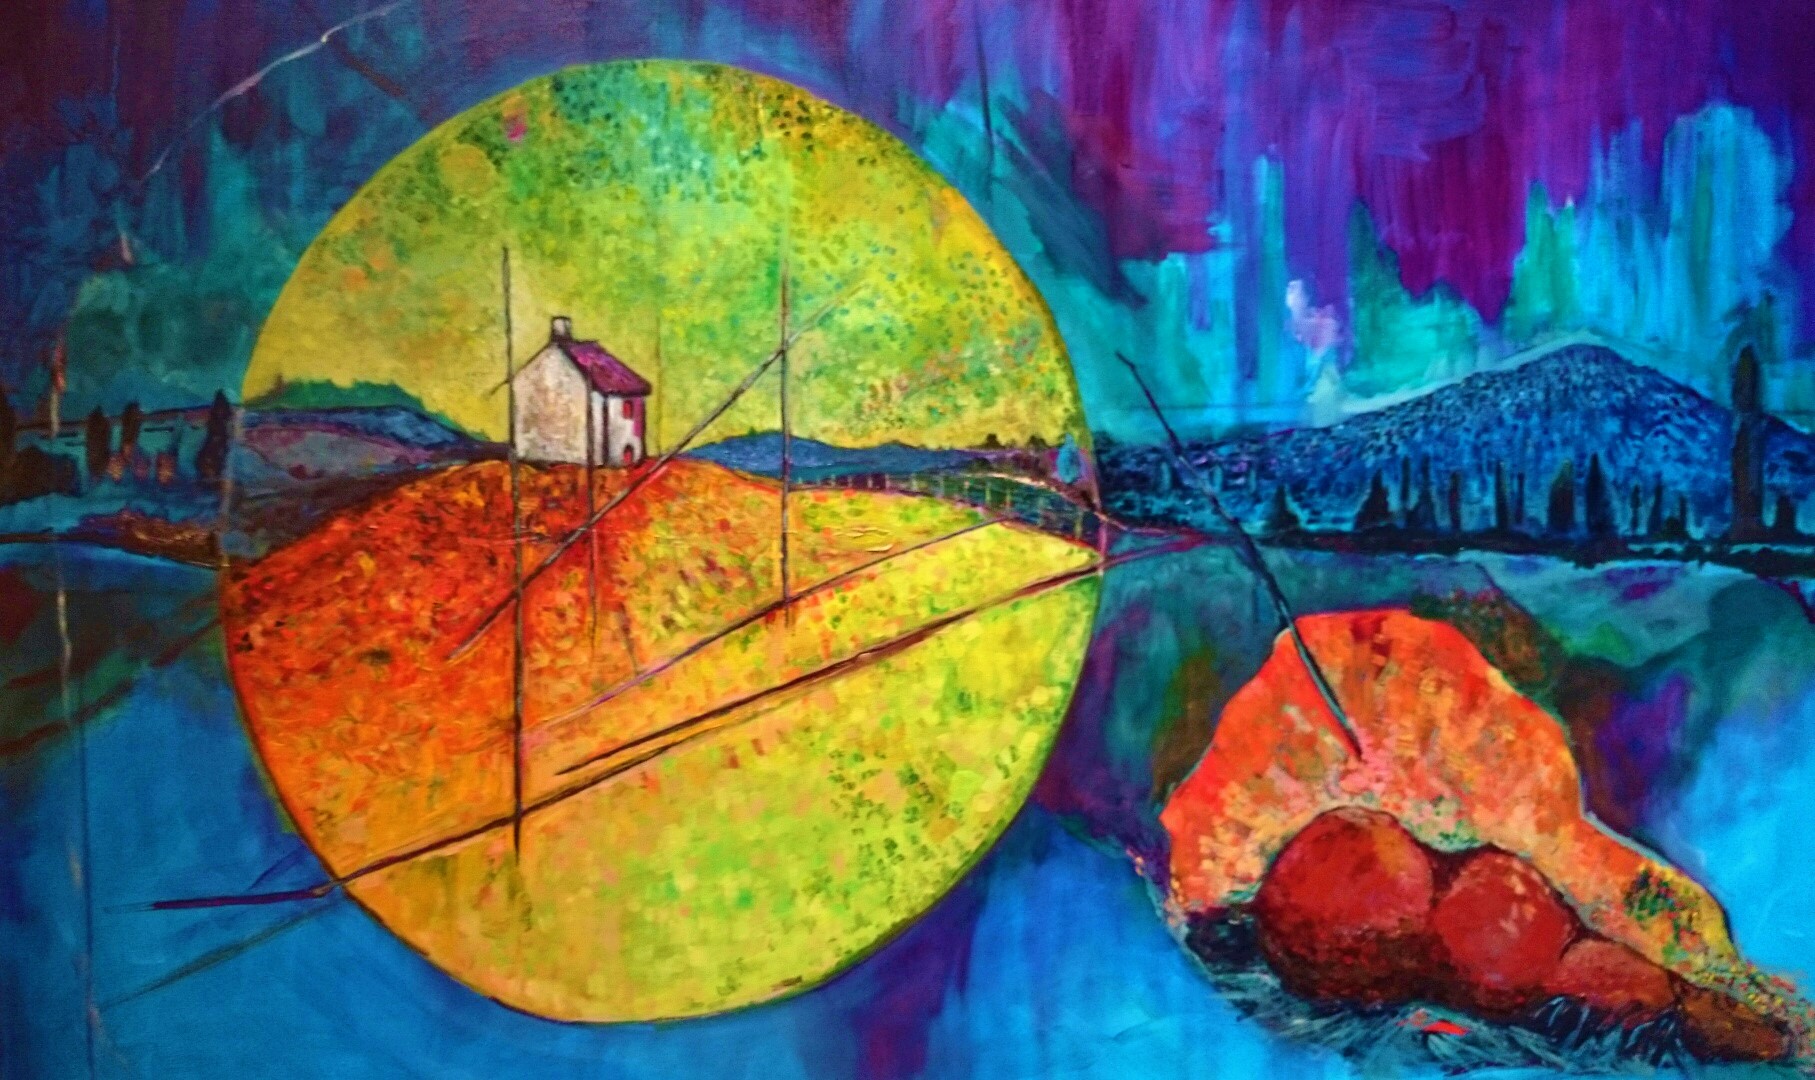 horse home grave story memory oil on canvas landscape nocturnal orb expressionist contrast